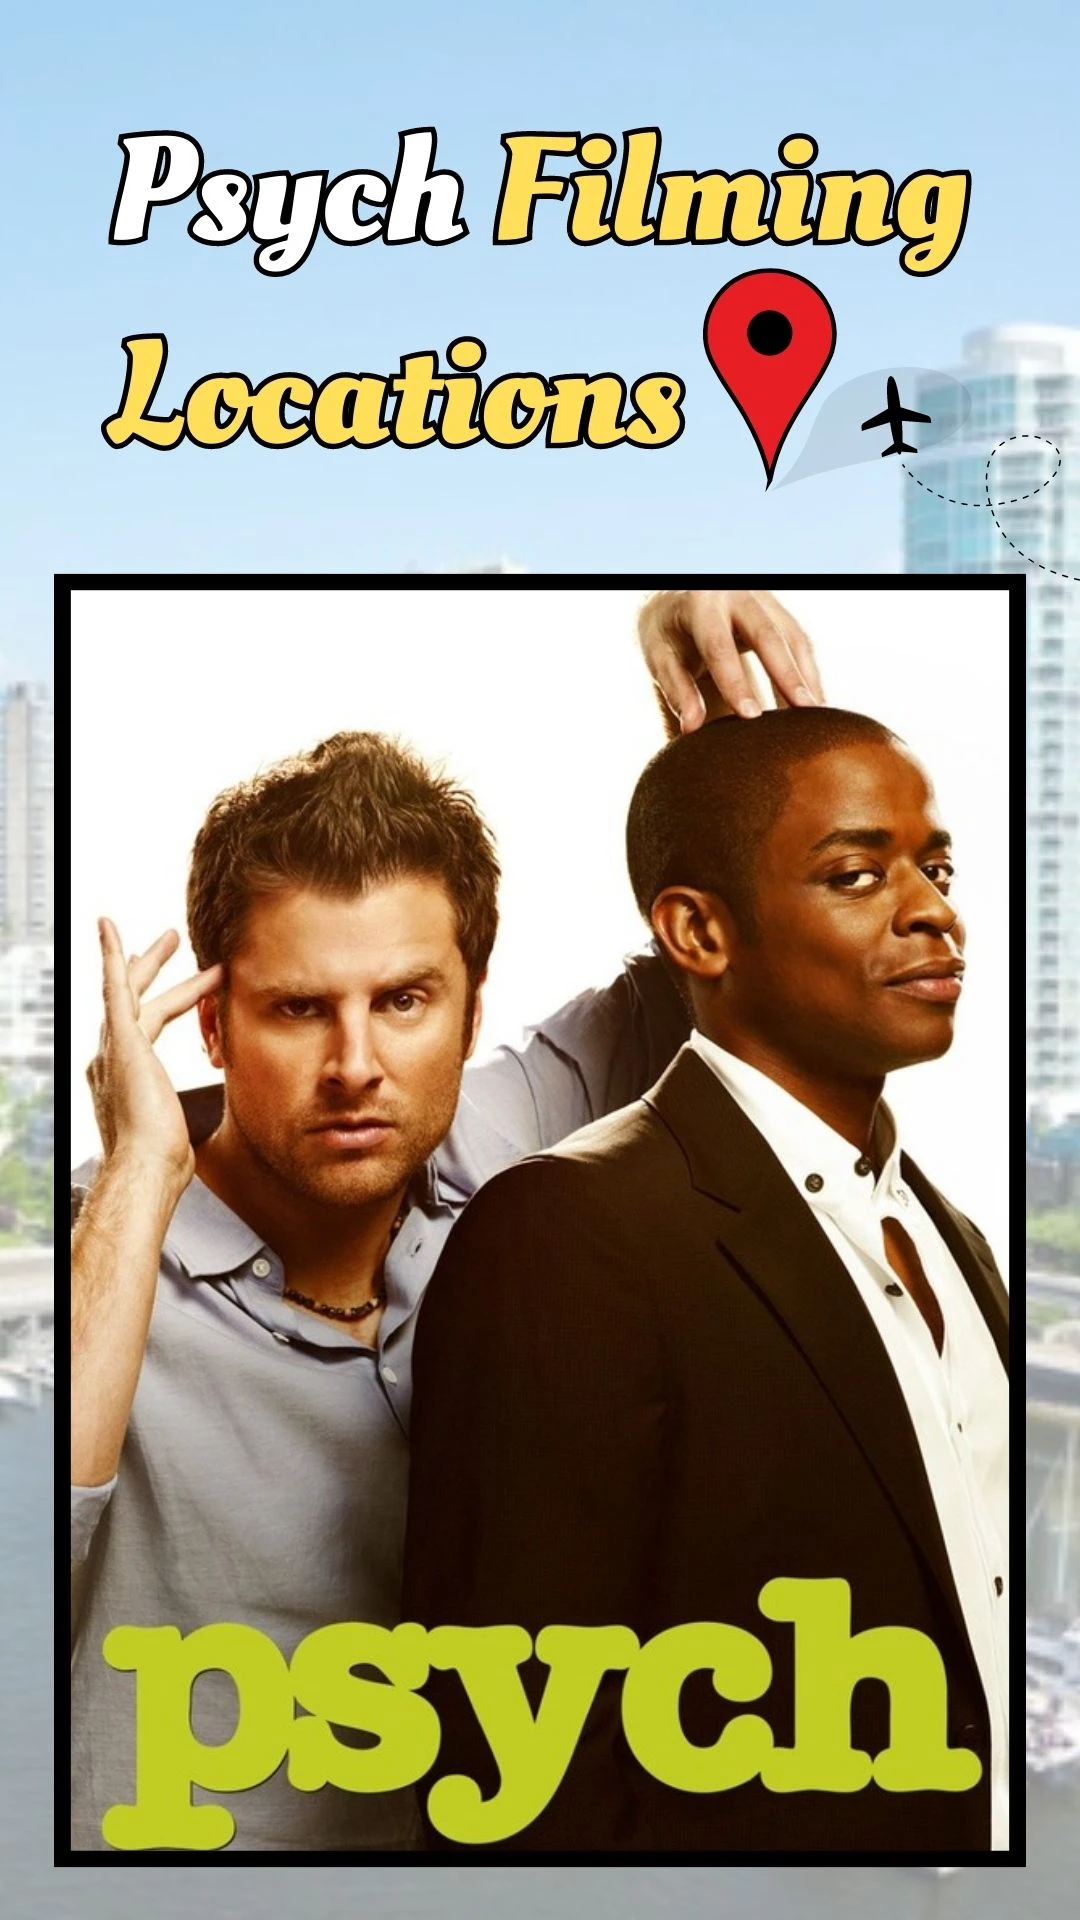 Psych Filming Locations